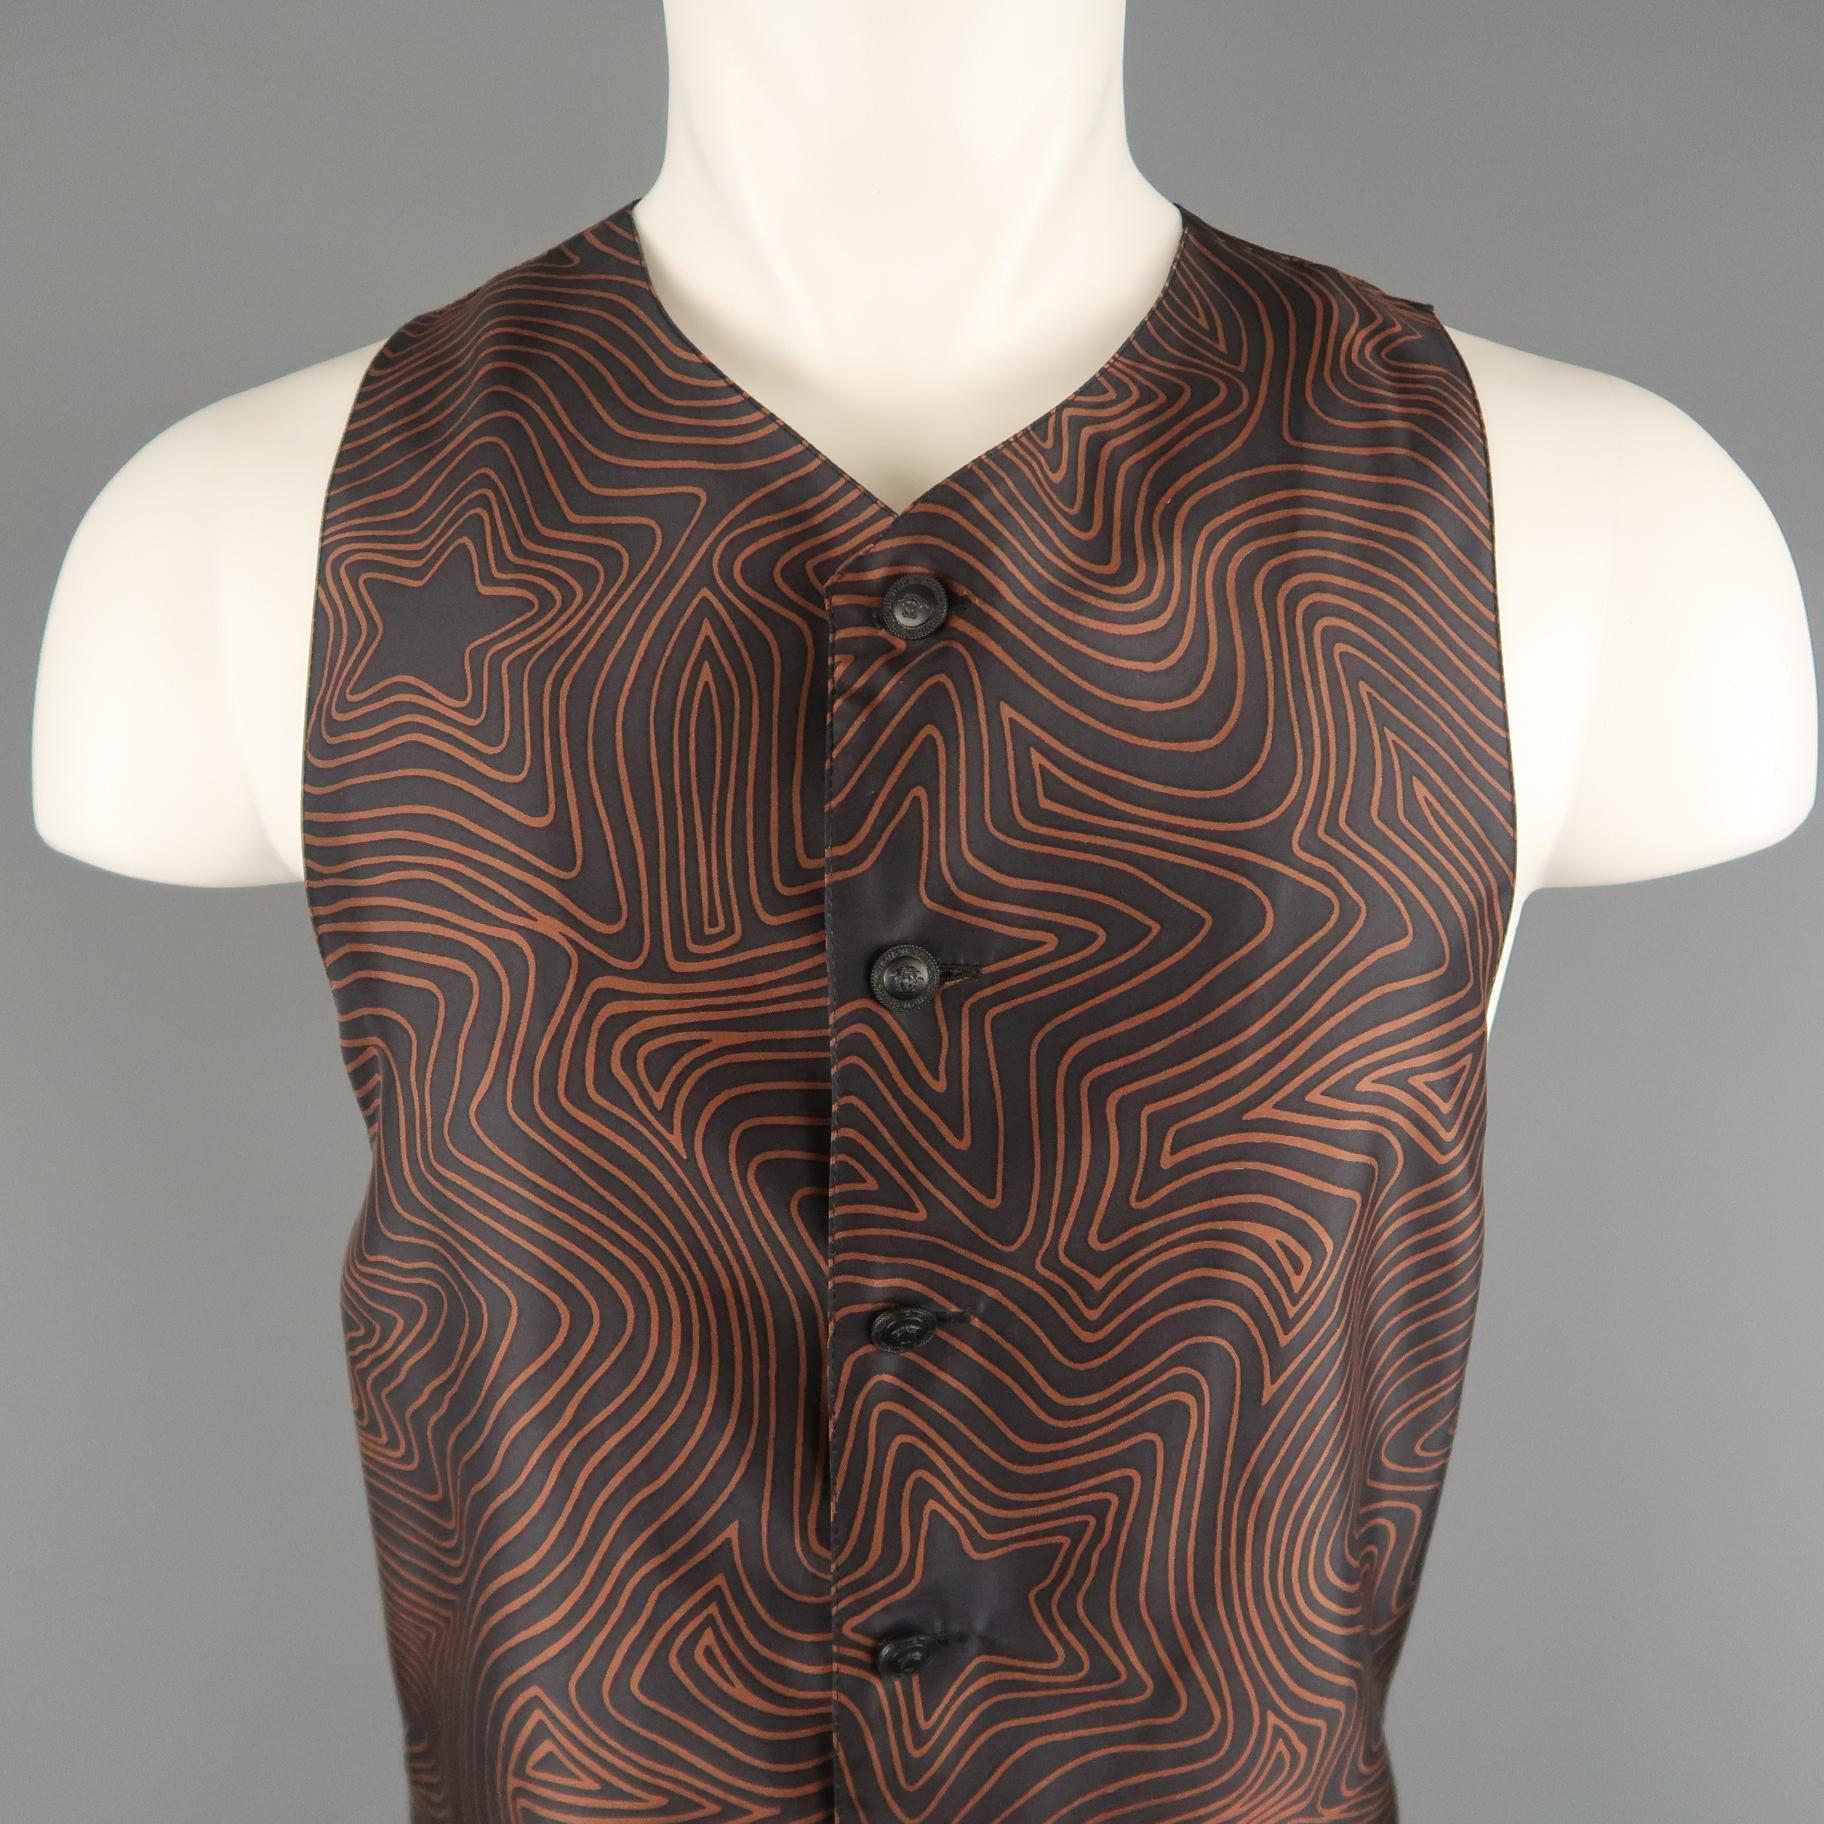 Vintage 1990's GIANNI VERSACE vest comes in black and brown star print silk with a high V neck, black Medusa button front, and silver tone western hardware belt. Made in Italy.
 
Excellent Pre-Owned Condition.
Marked: IT 46
 
Measurements:
